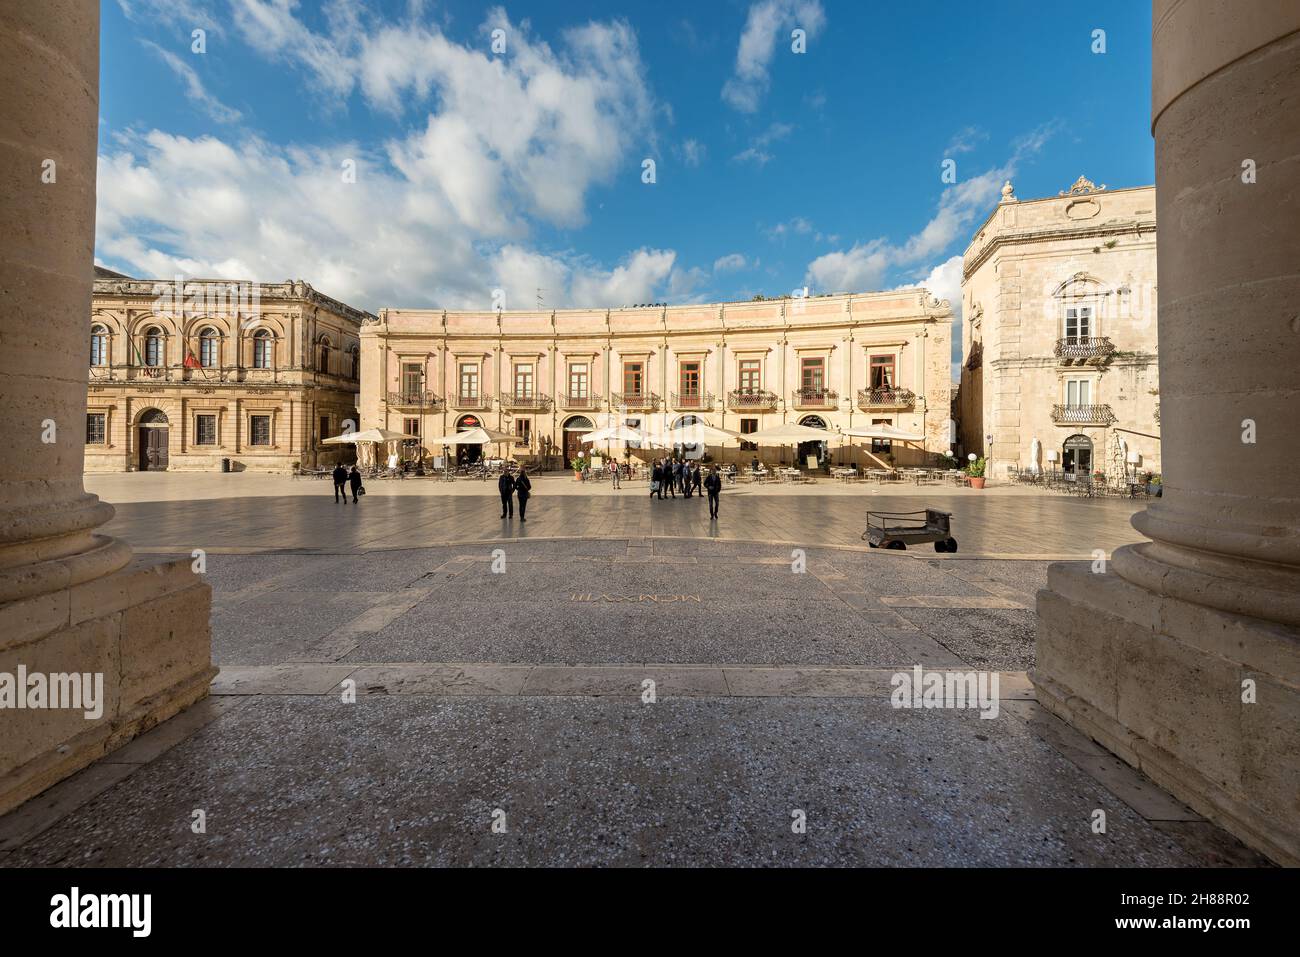 Tourists visit the Cathedral Square (Piazza del Duomo) in the island of Ortigia, historic center of Siracusa, Sicily island, Italy, Europe. Stock Photo